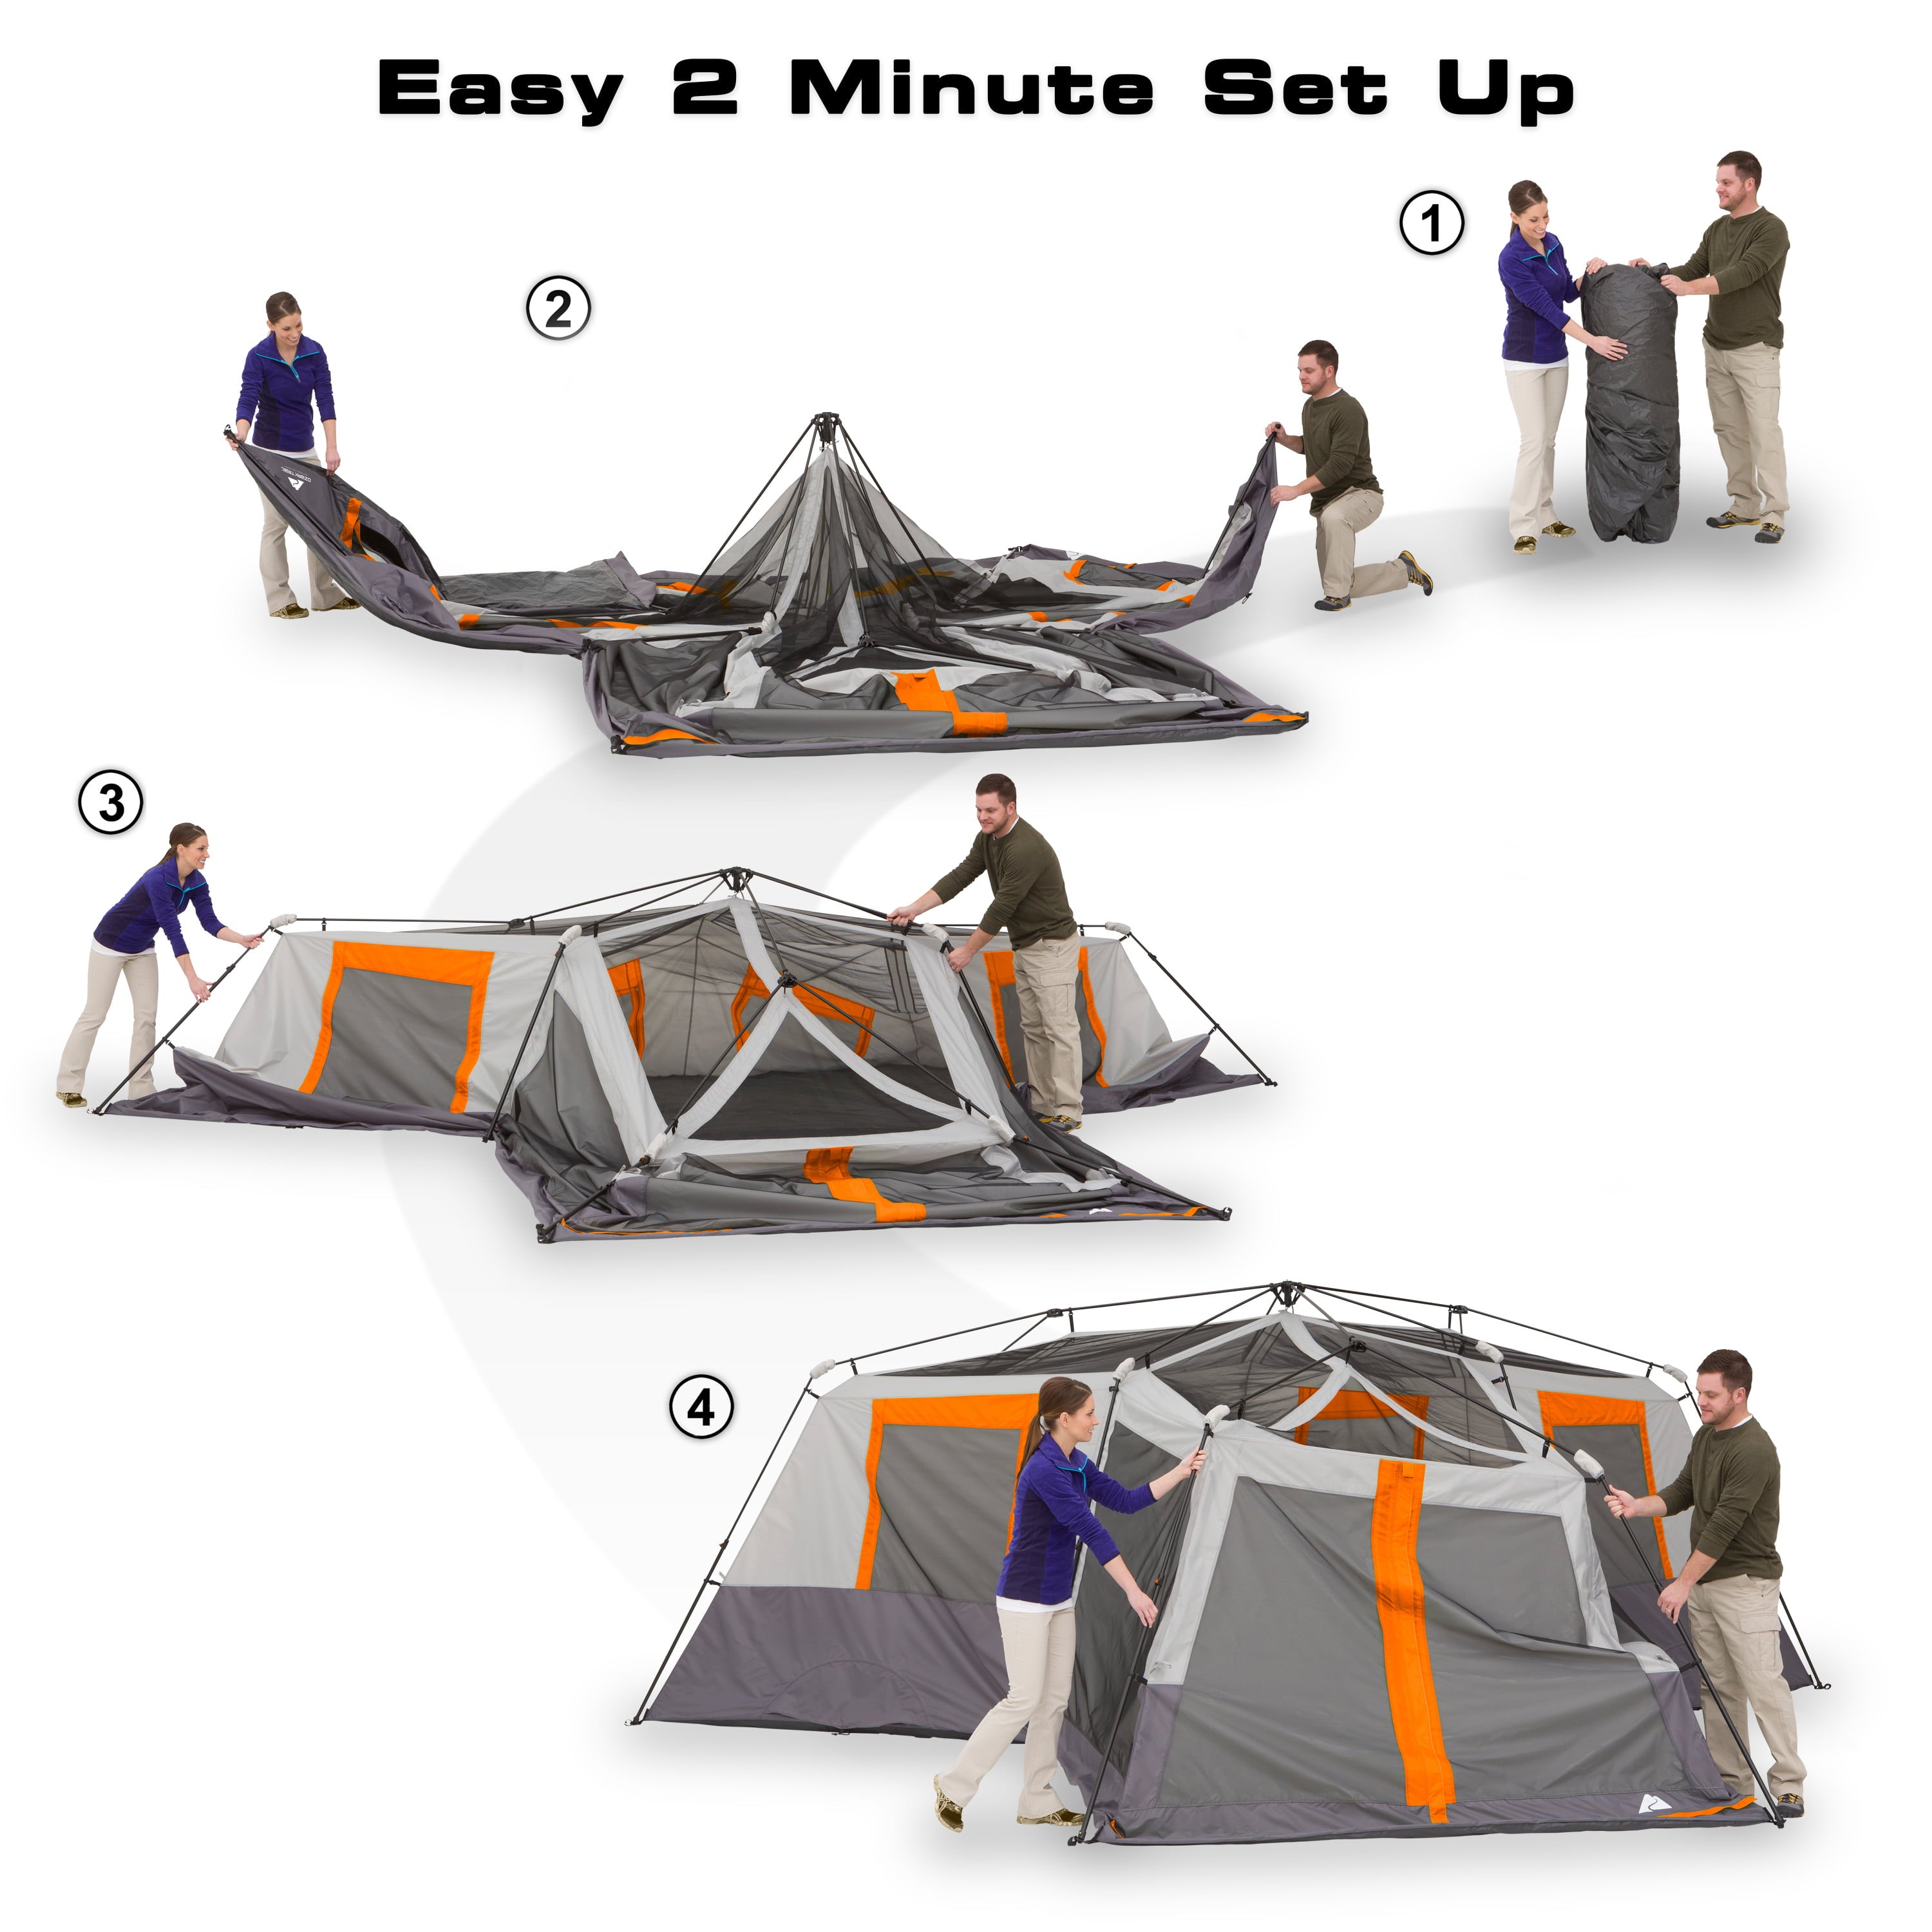 Ozark Trail 12-Person 3-Room Instant Cabin Tent with Screen Room